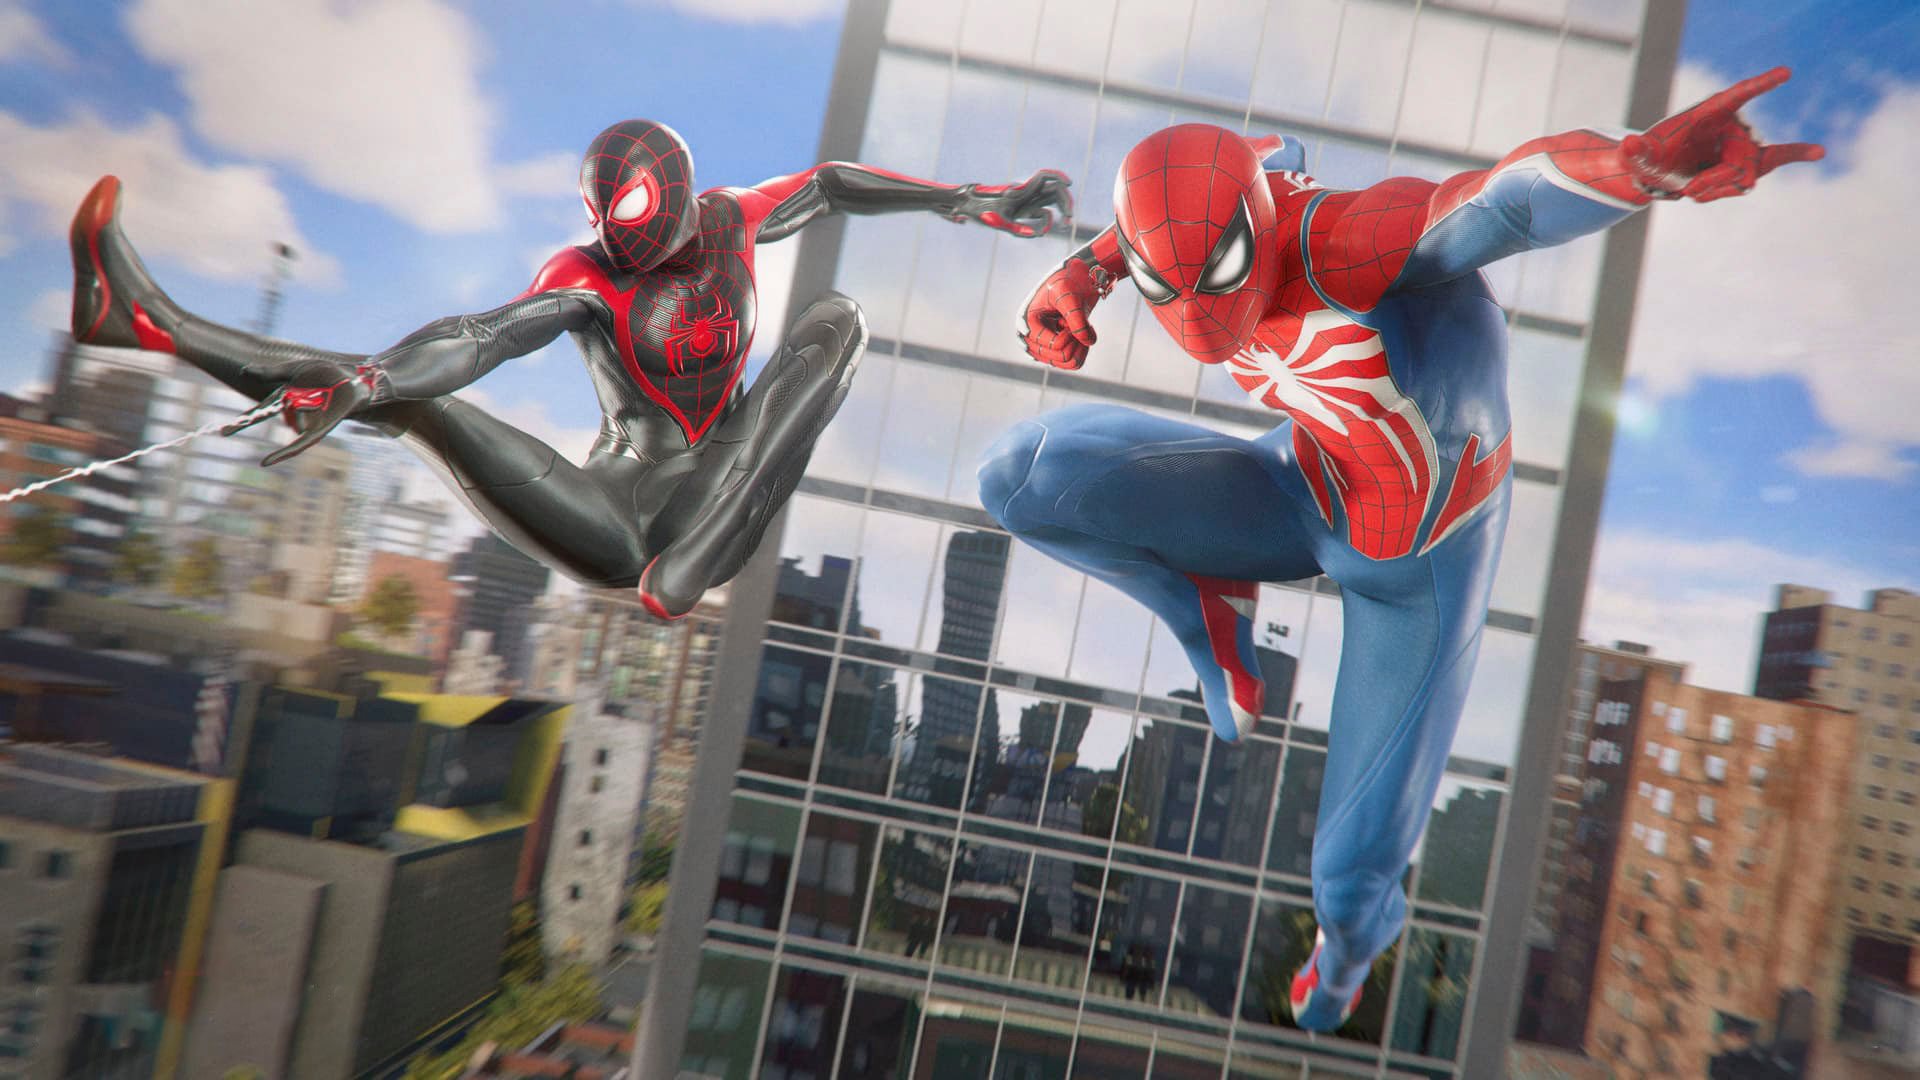 Peter Parker and Miles Morales team up in Marvel’s Spider-Man 2 on PlayStation 5, with players getting to fight as both the Spider-Men. Photo: Marvel Games